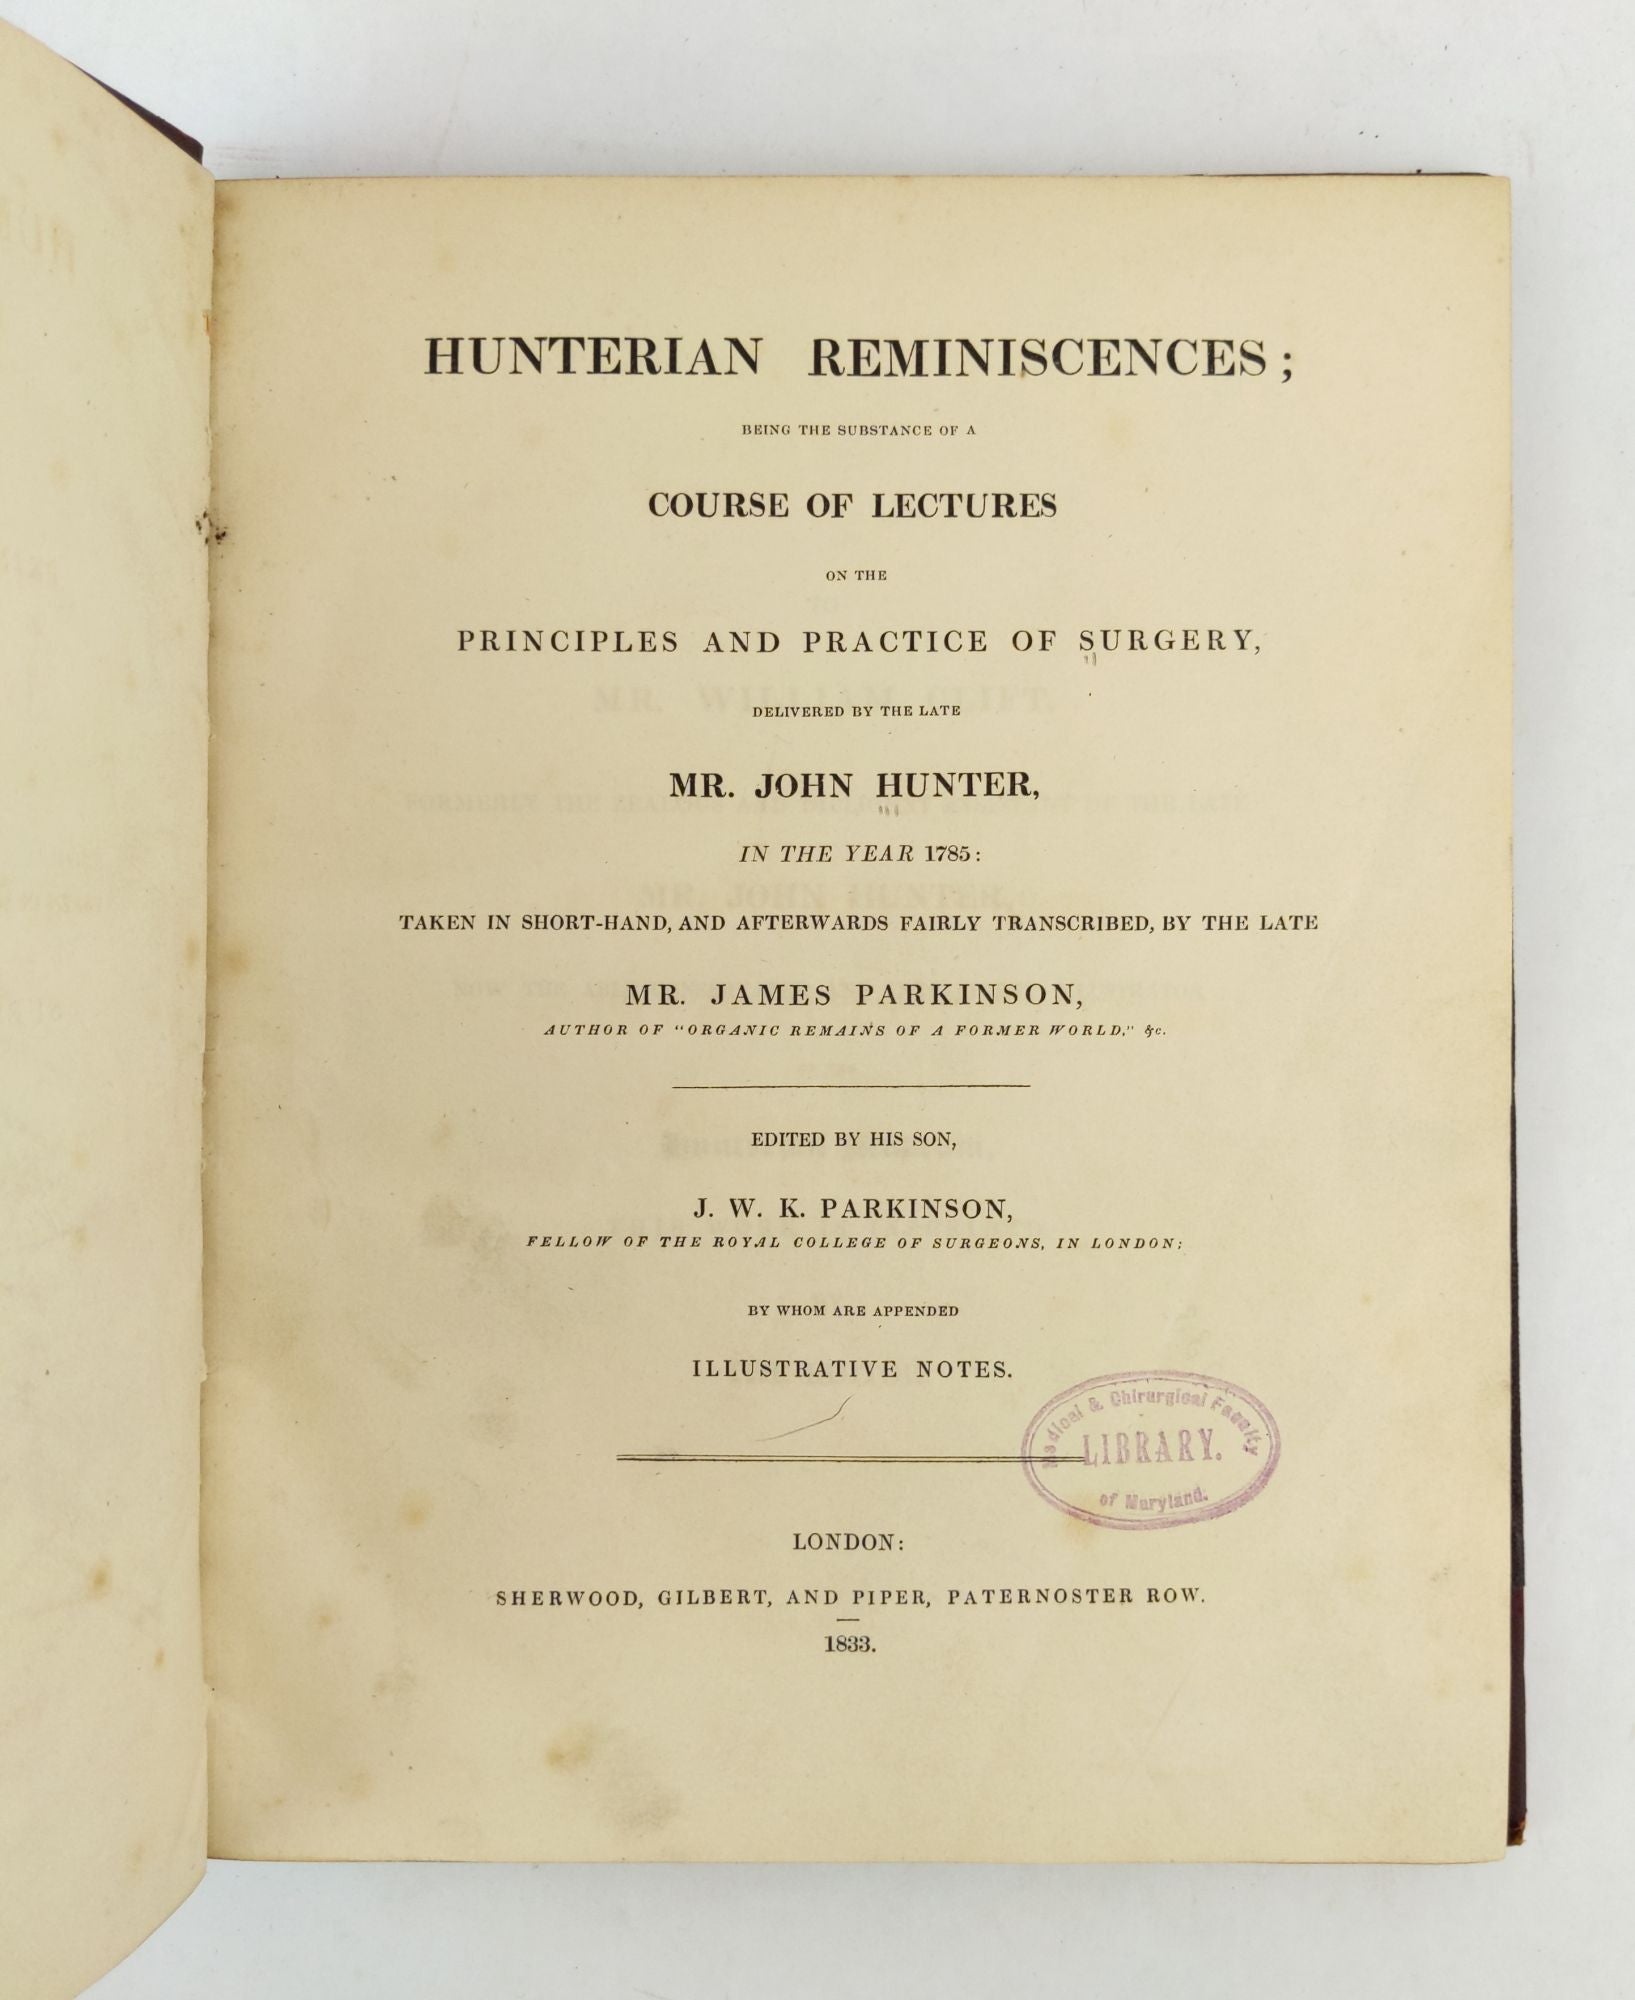 Product Image for HUNTERIAN REMINISCENCES; BEING THE SUBSTANCE OF A COURSE OF LECTURES ON THE PRINCIPLES AND PRACTICE OF SURGERY, DELIVERED BY THE LATE MR. JOHN HUNTER, IN THE YEAR 1785